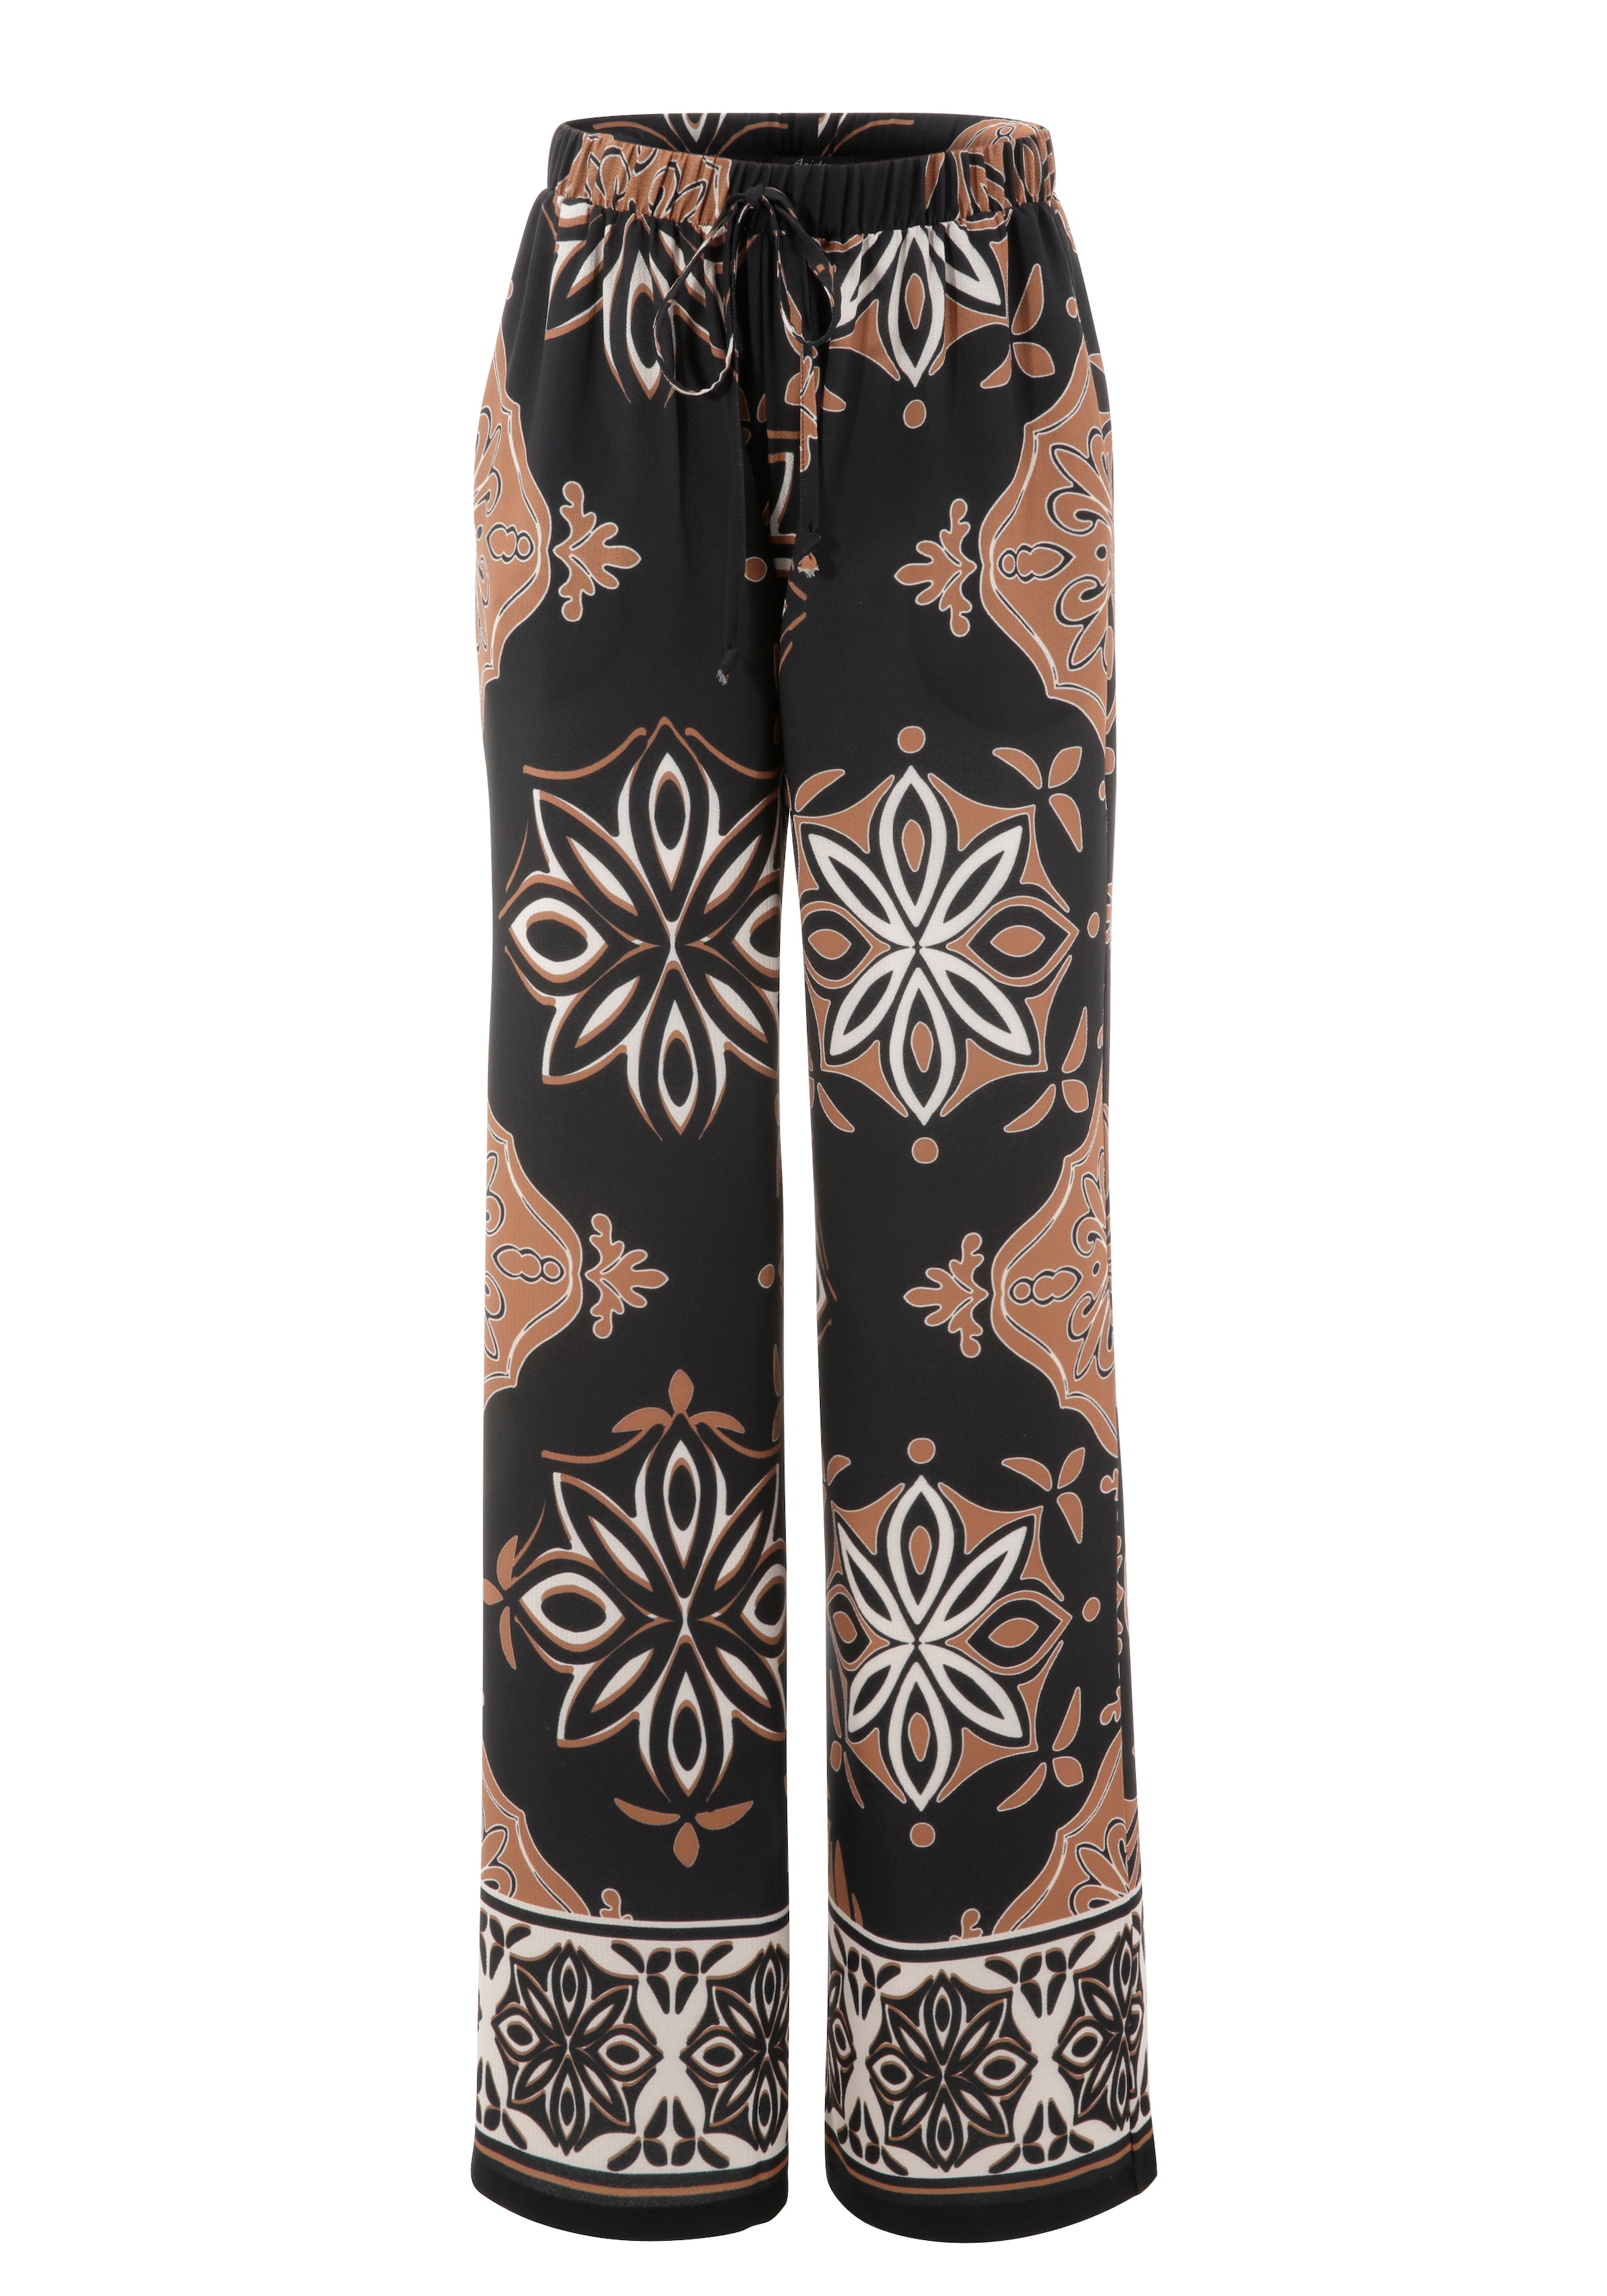 Aniston SELECTED Palazzohose, mit Ornamente-Druck